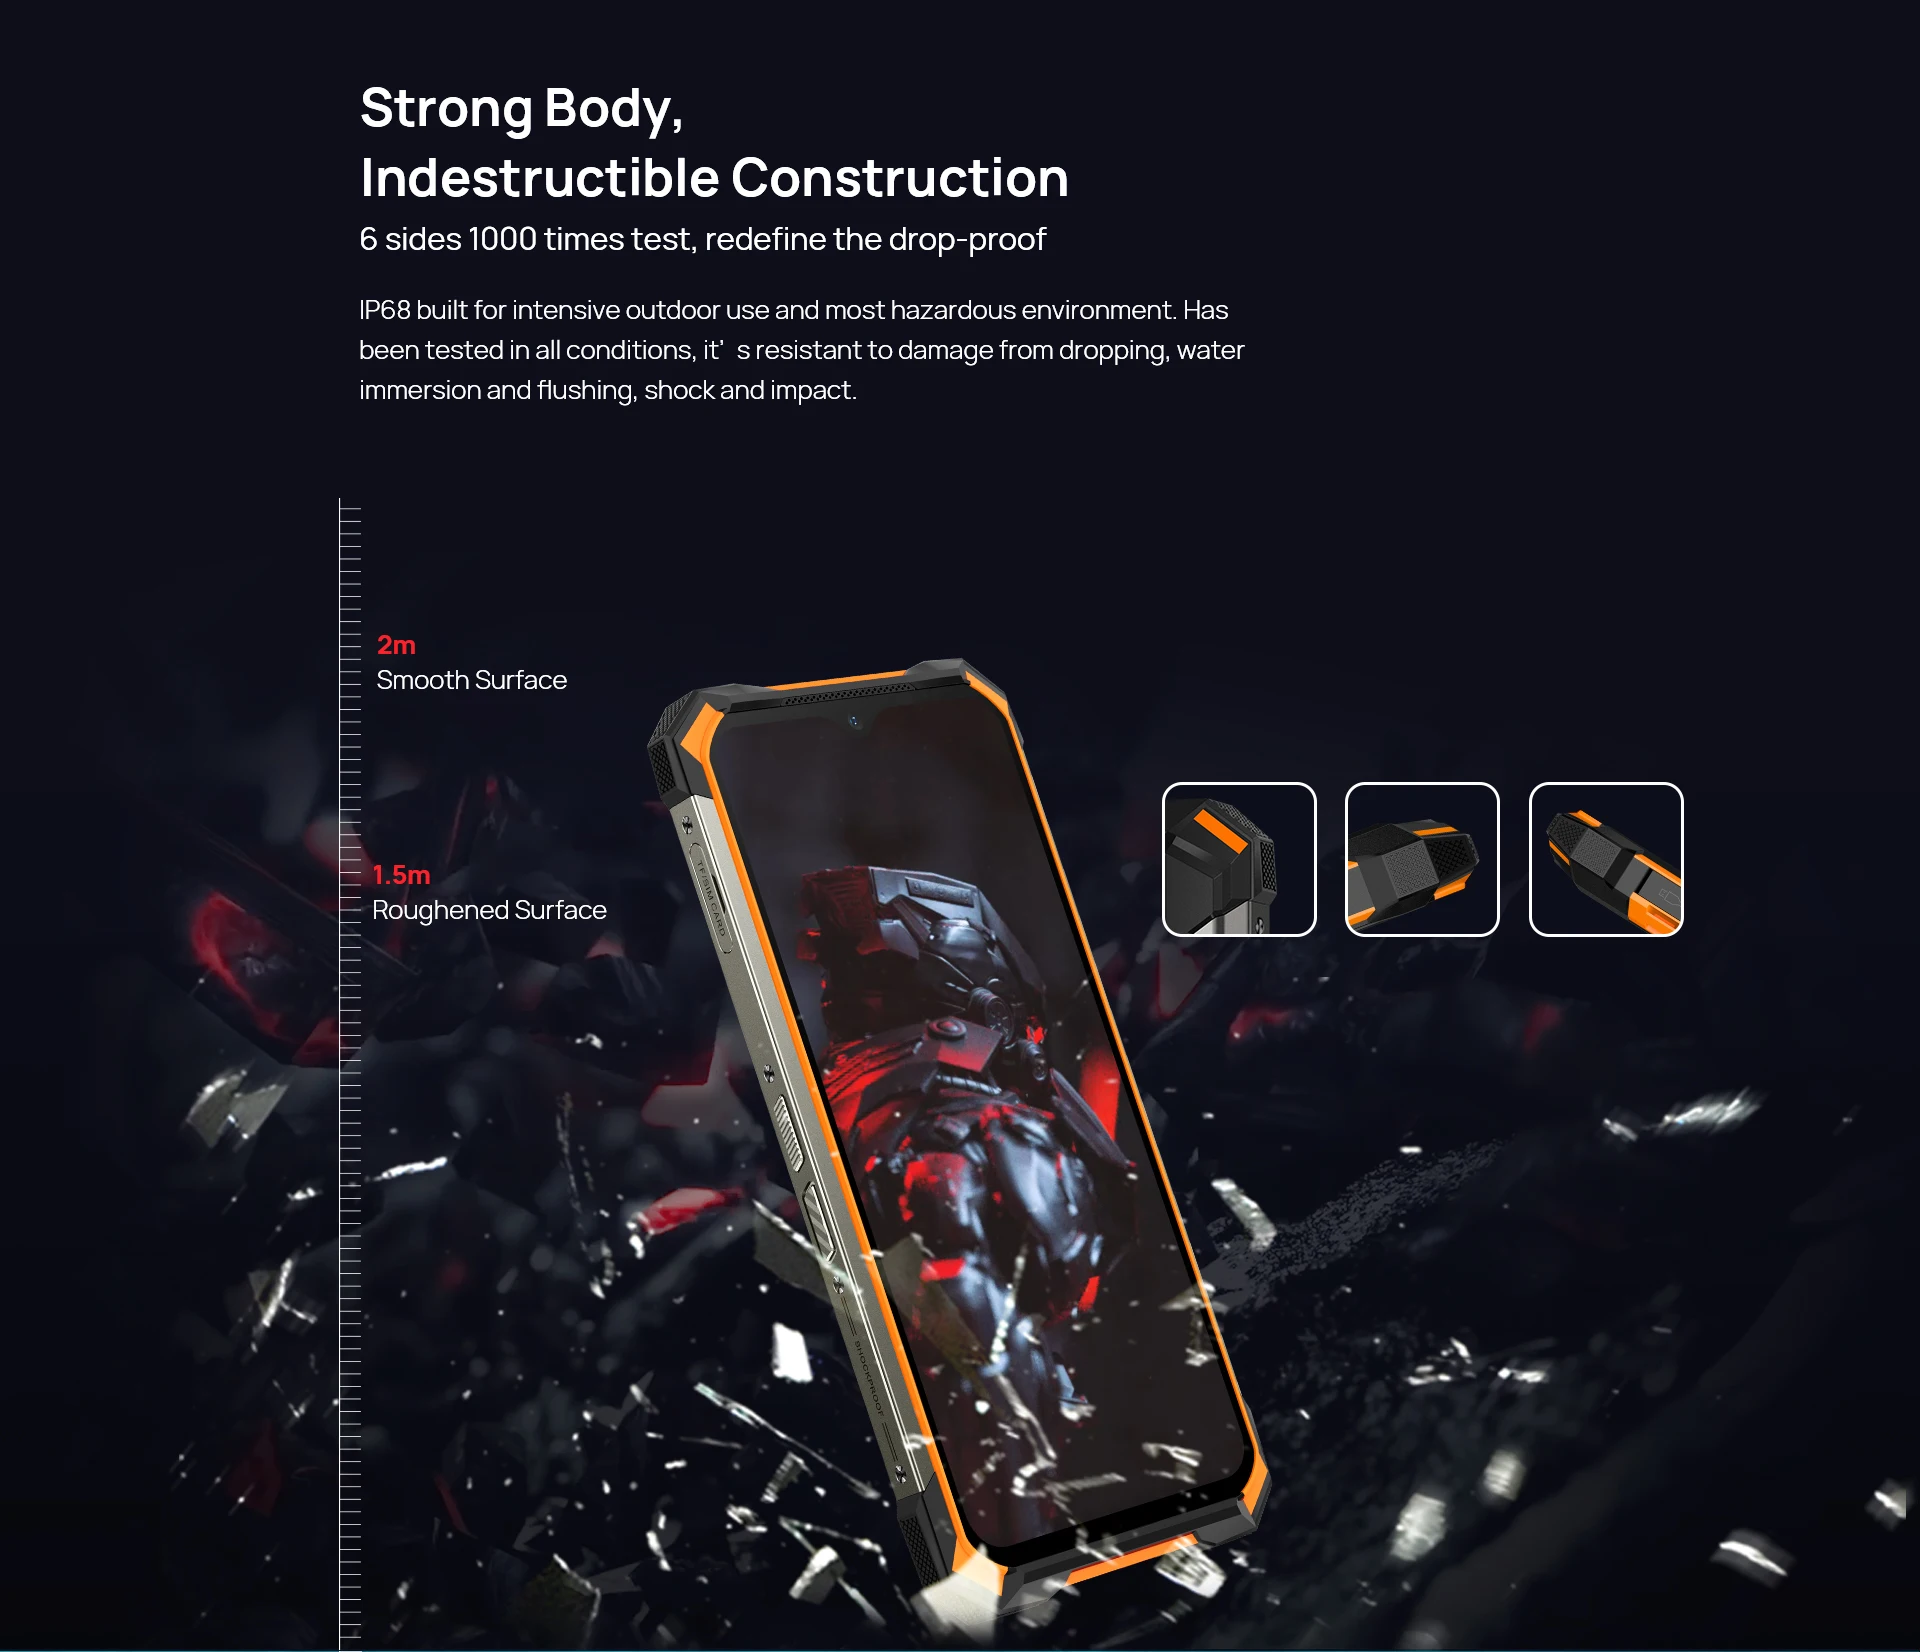 Doogee S88 Plus Rugged Mobile Phone 10000mAh Super Battery 8+128GB 48MP Main Camera Android 10 IP68/IP69K Global version Phone